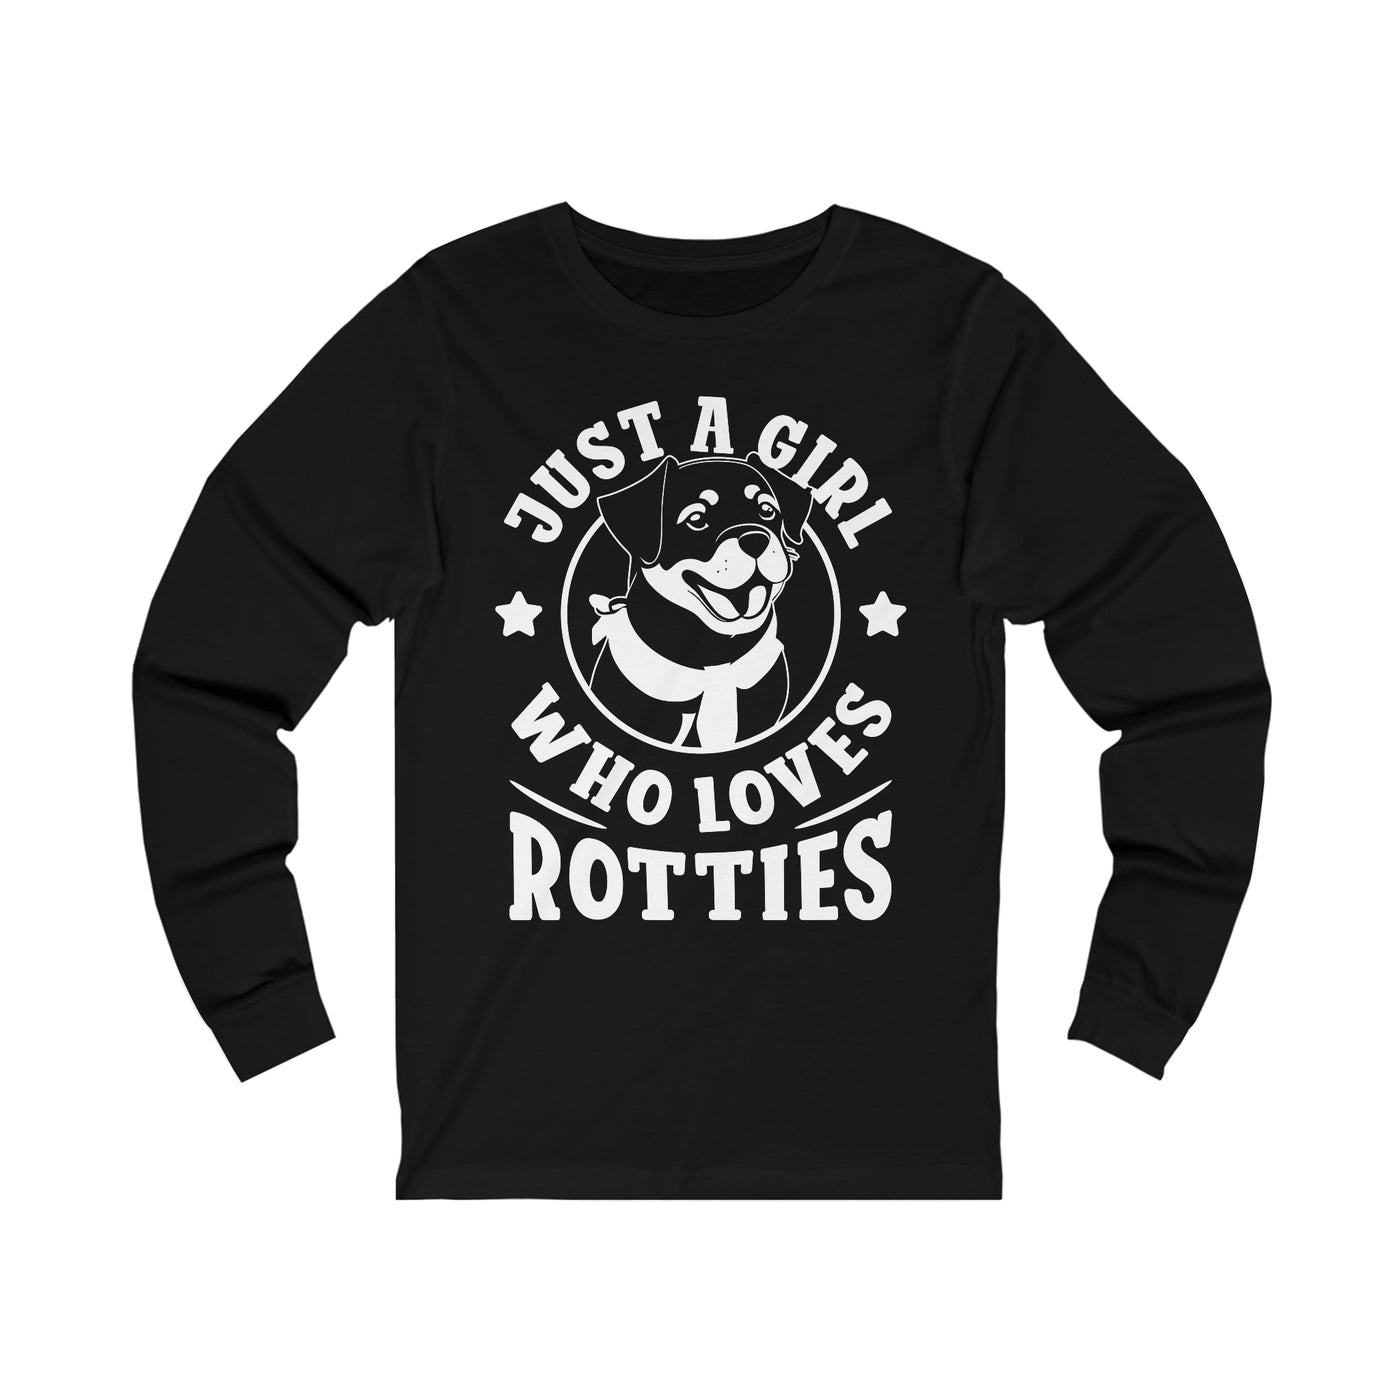 Just A Girl Who Loves Rotties Long Sleeves